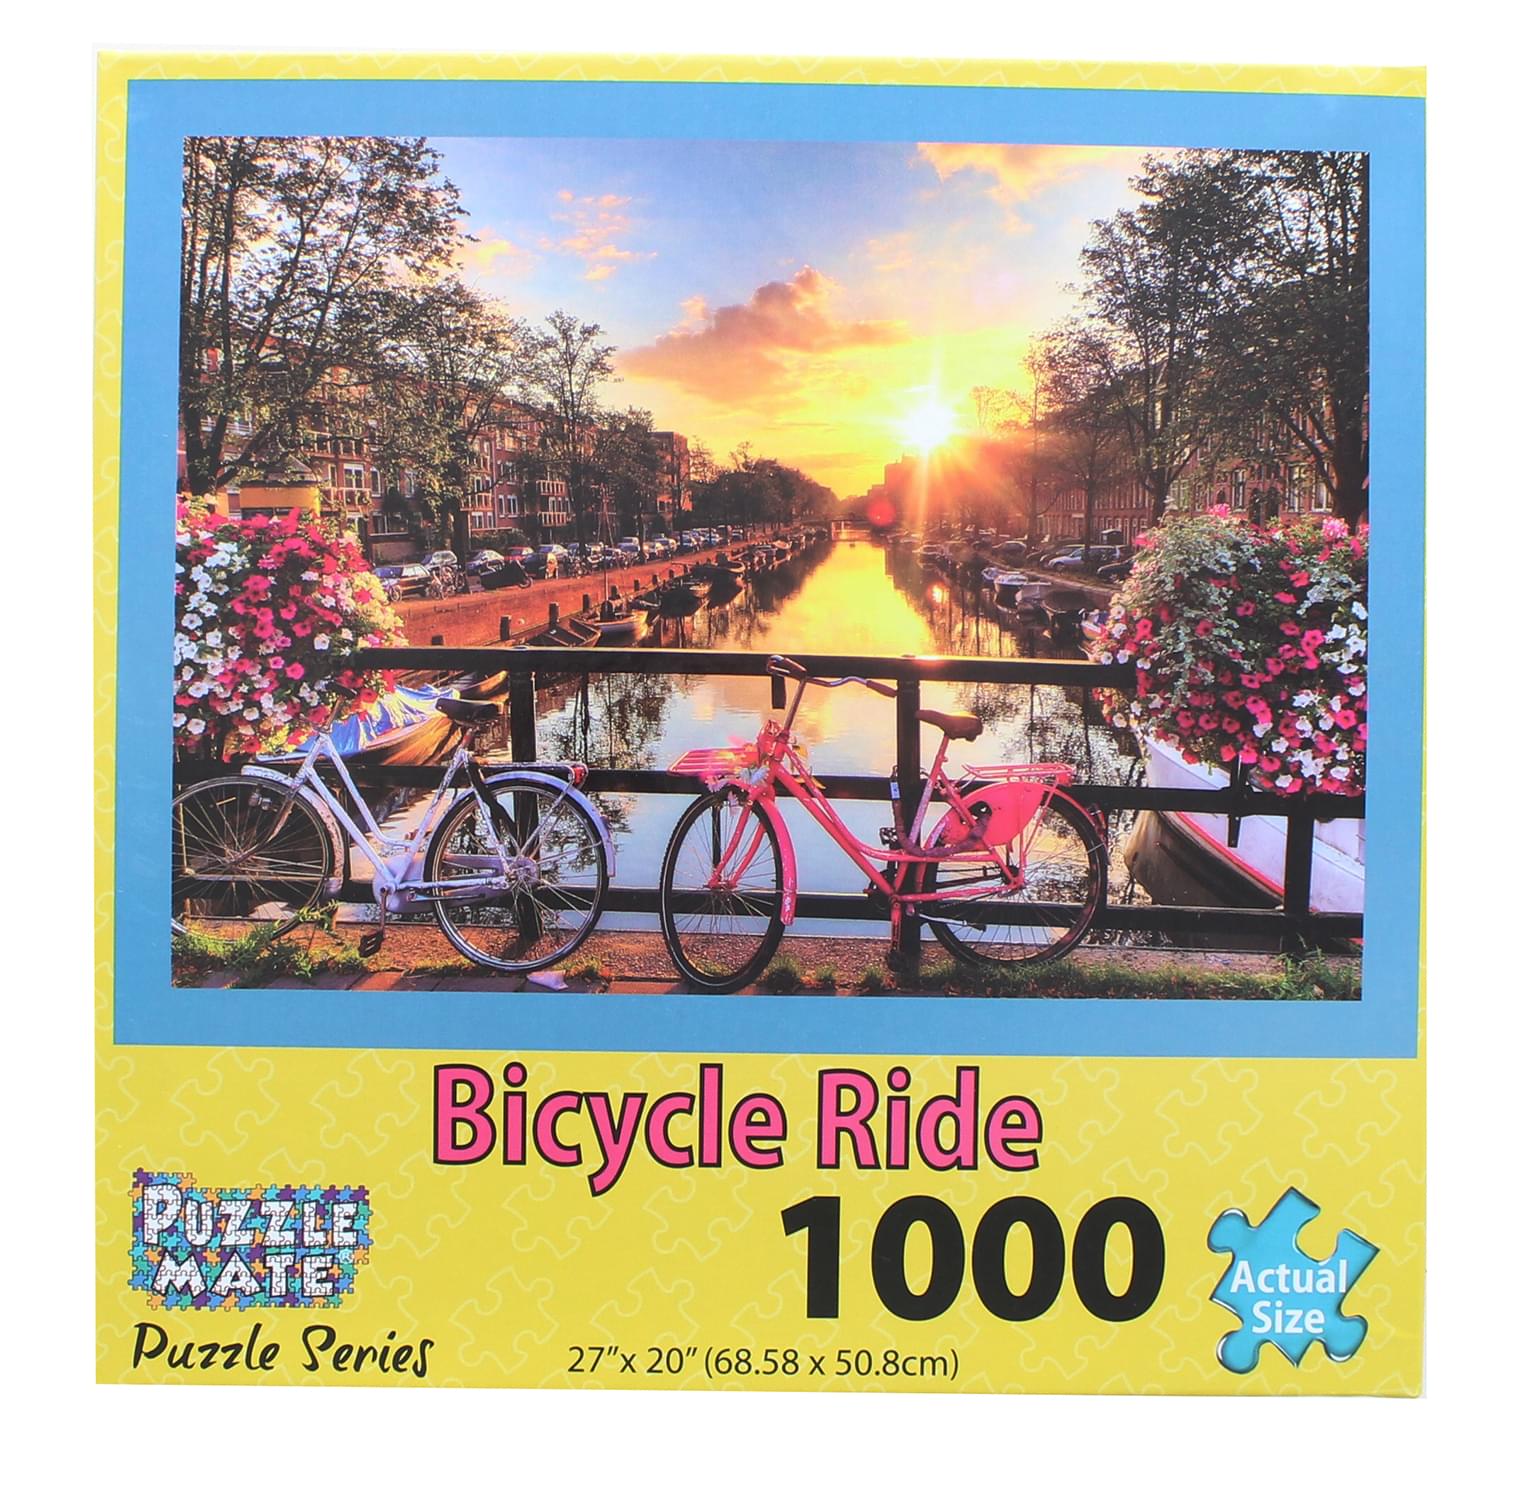 Bicycle Ride 1000 Piece Jigsaw Puzzle